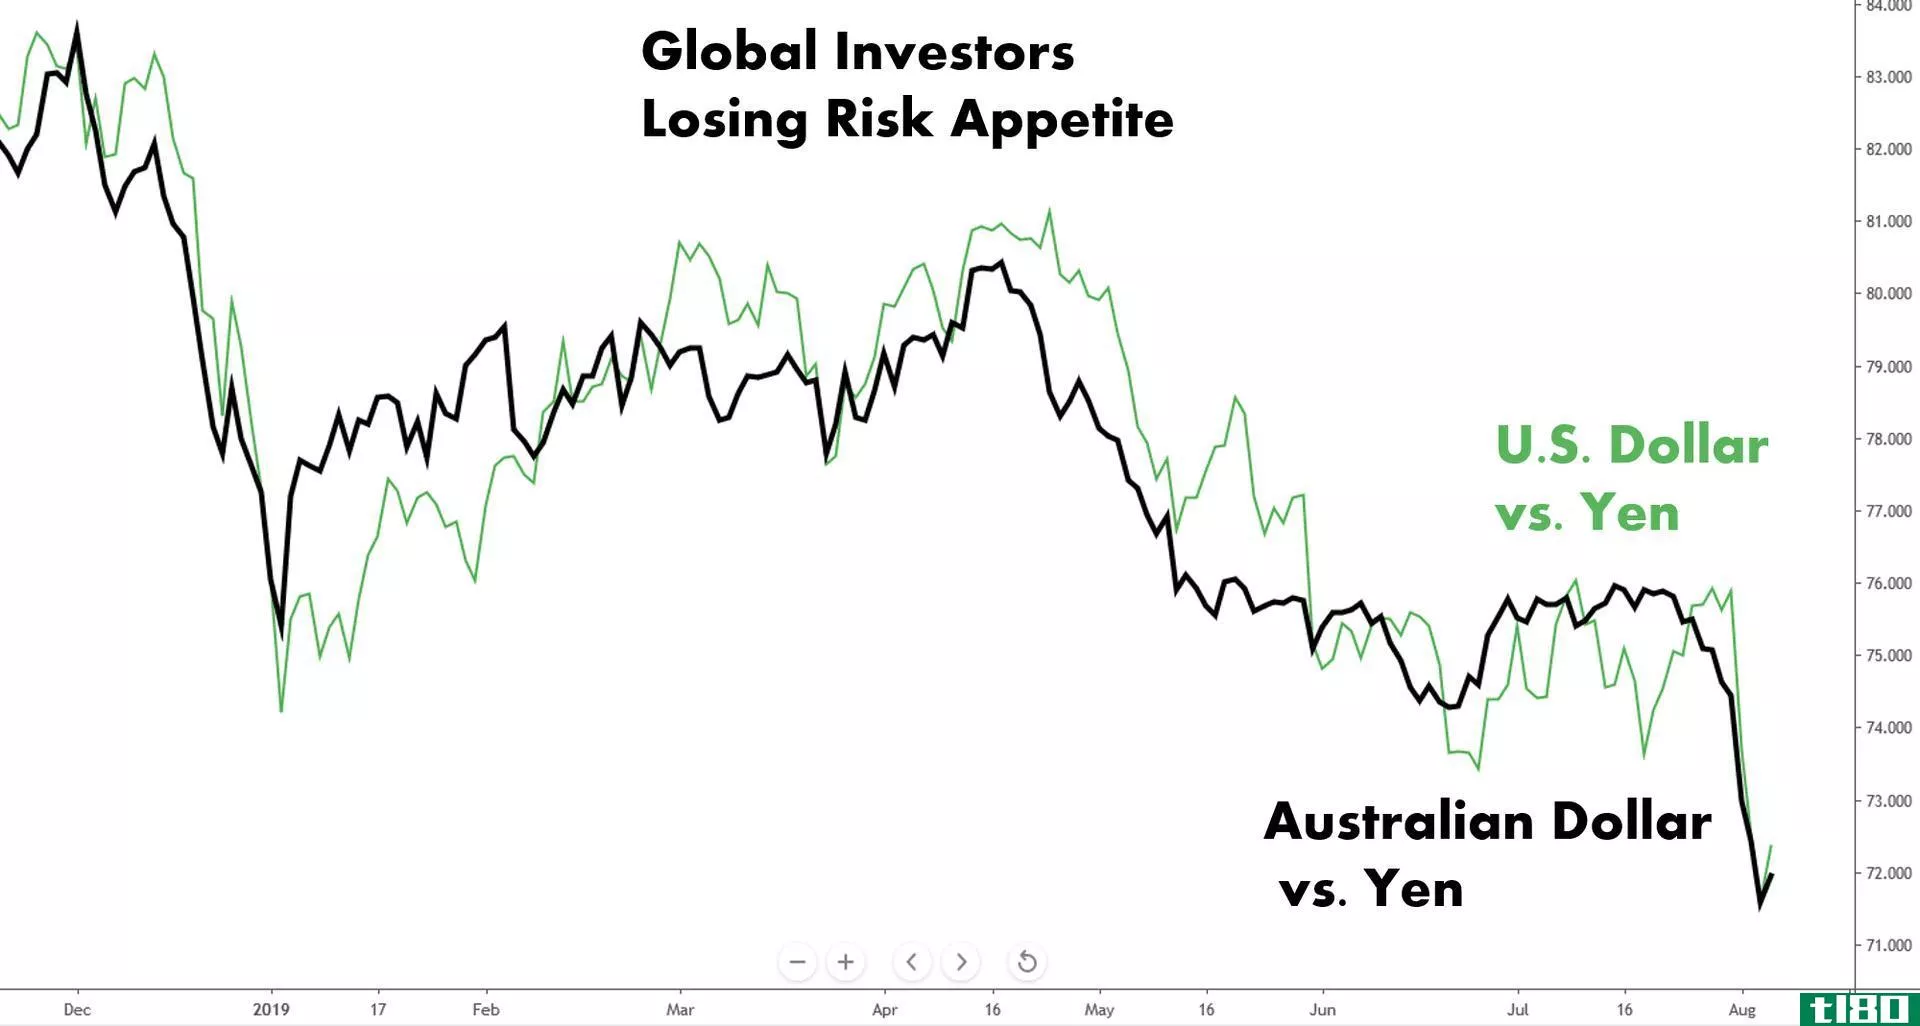 Chart showing the performance of the U.S. and Australian dollar vs. the Japanese yen